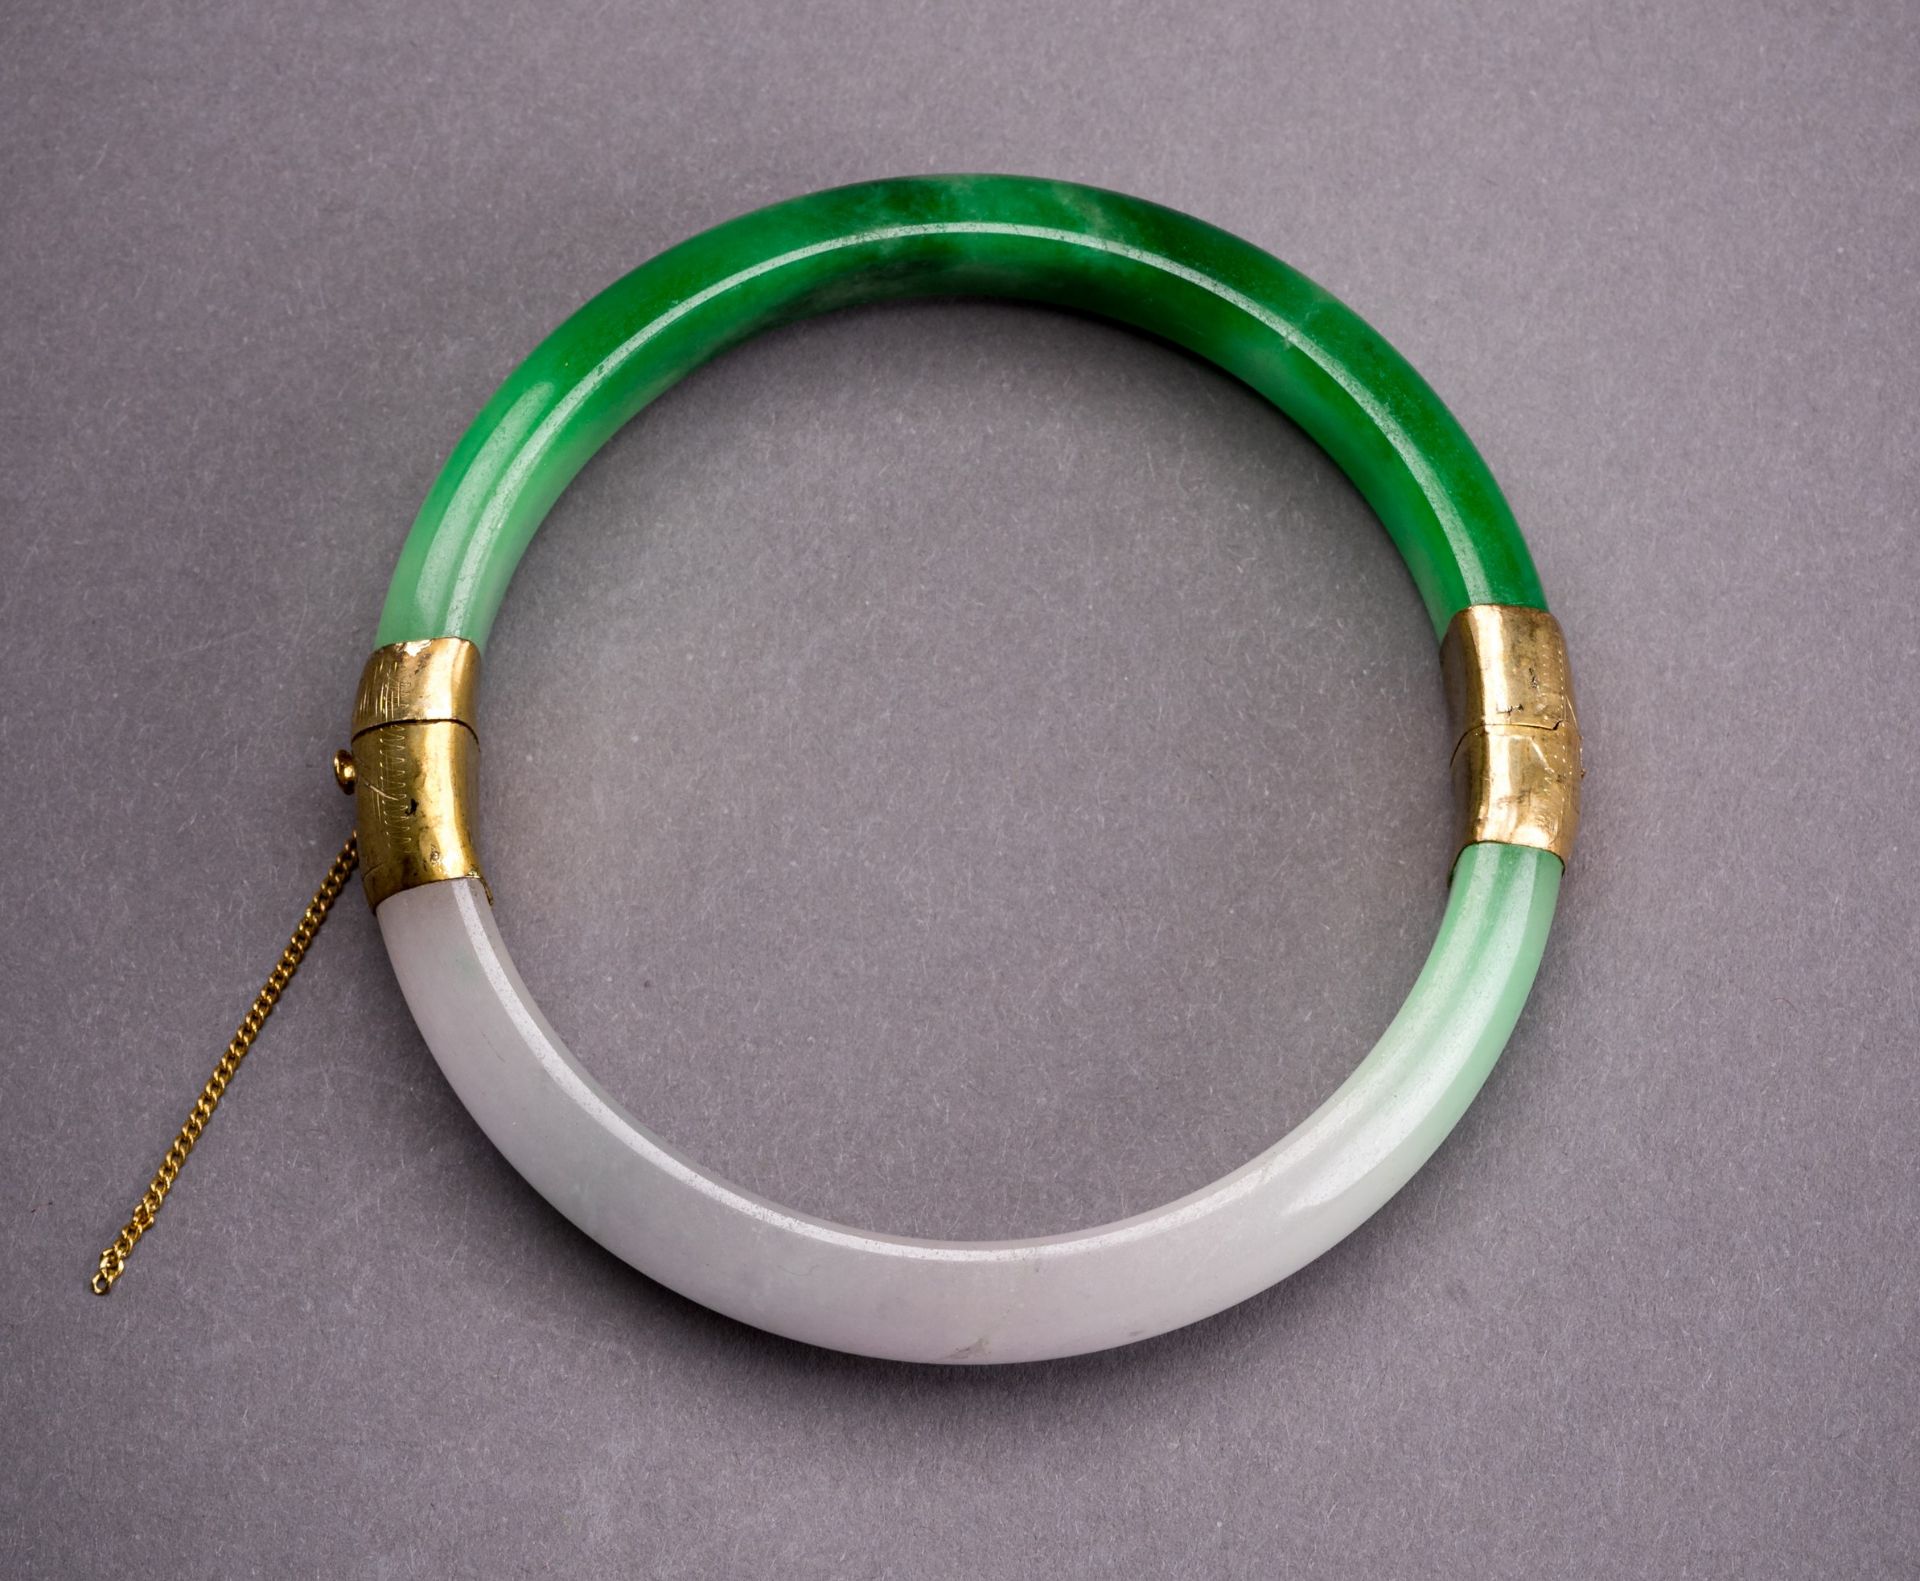 A PALE LAVENDER AND EMERALD GREEN JADEITE BANGLE